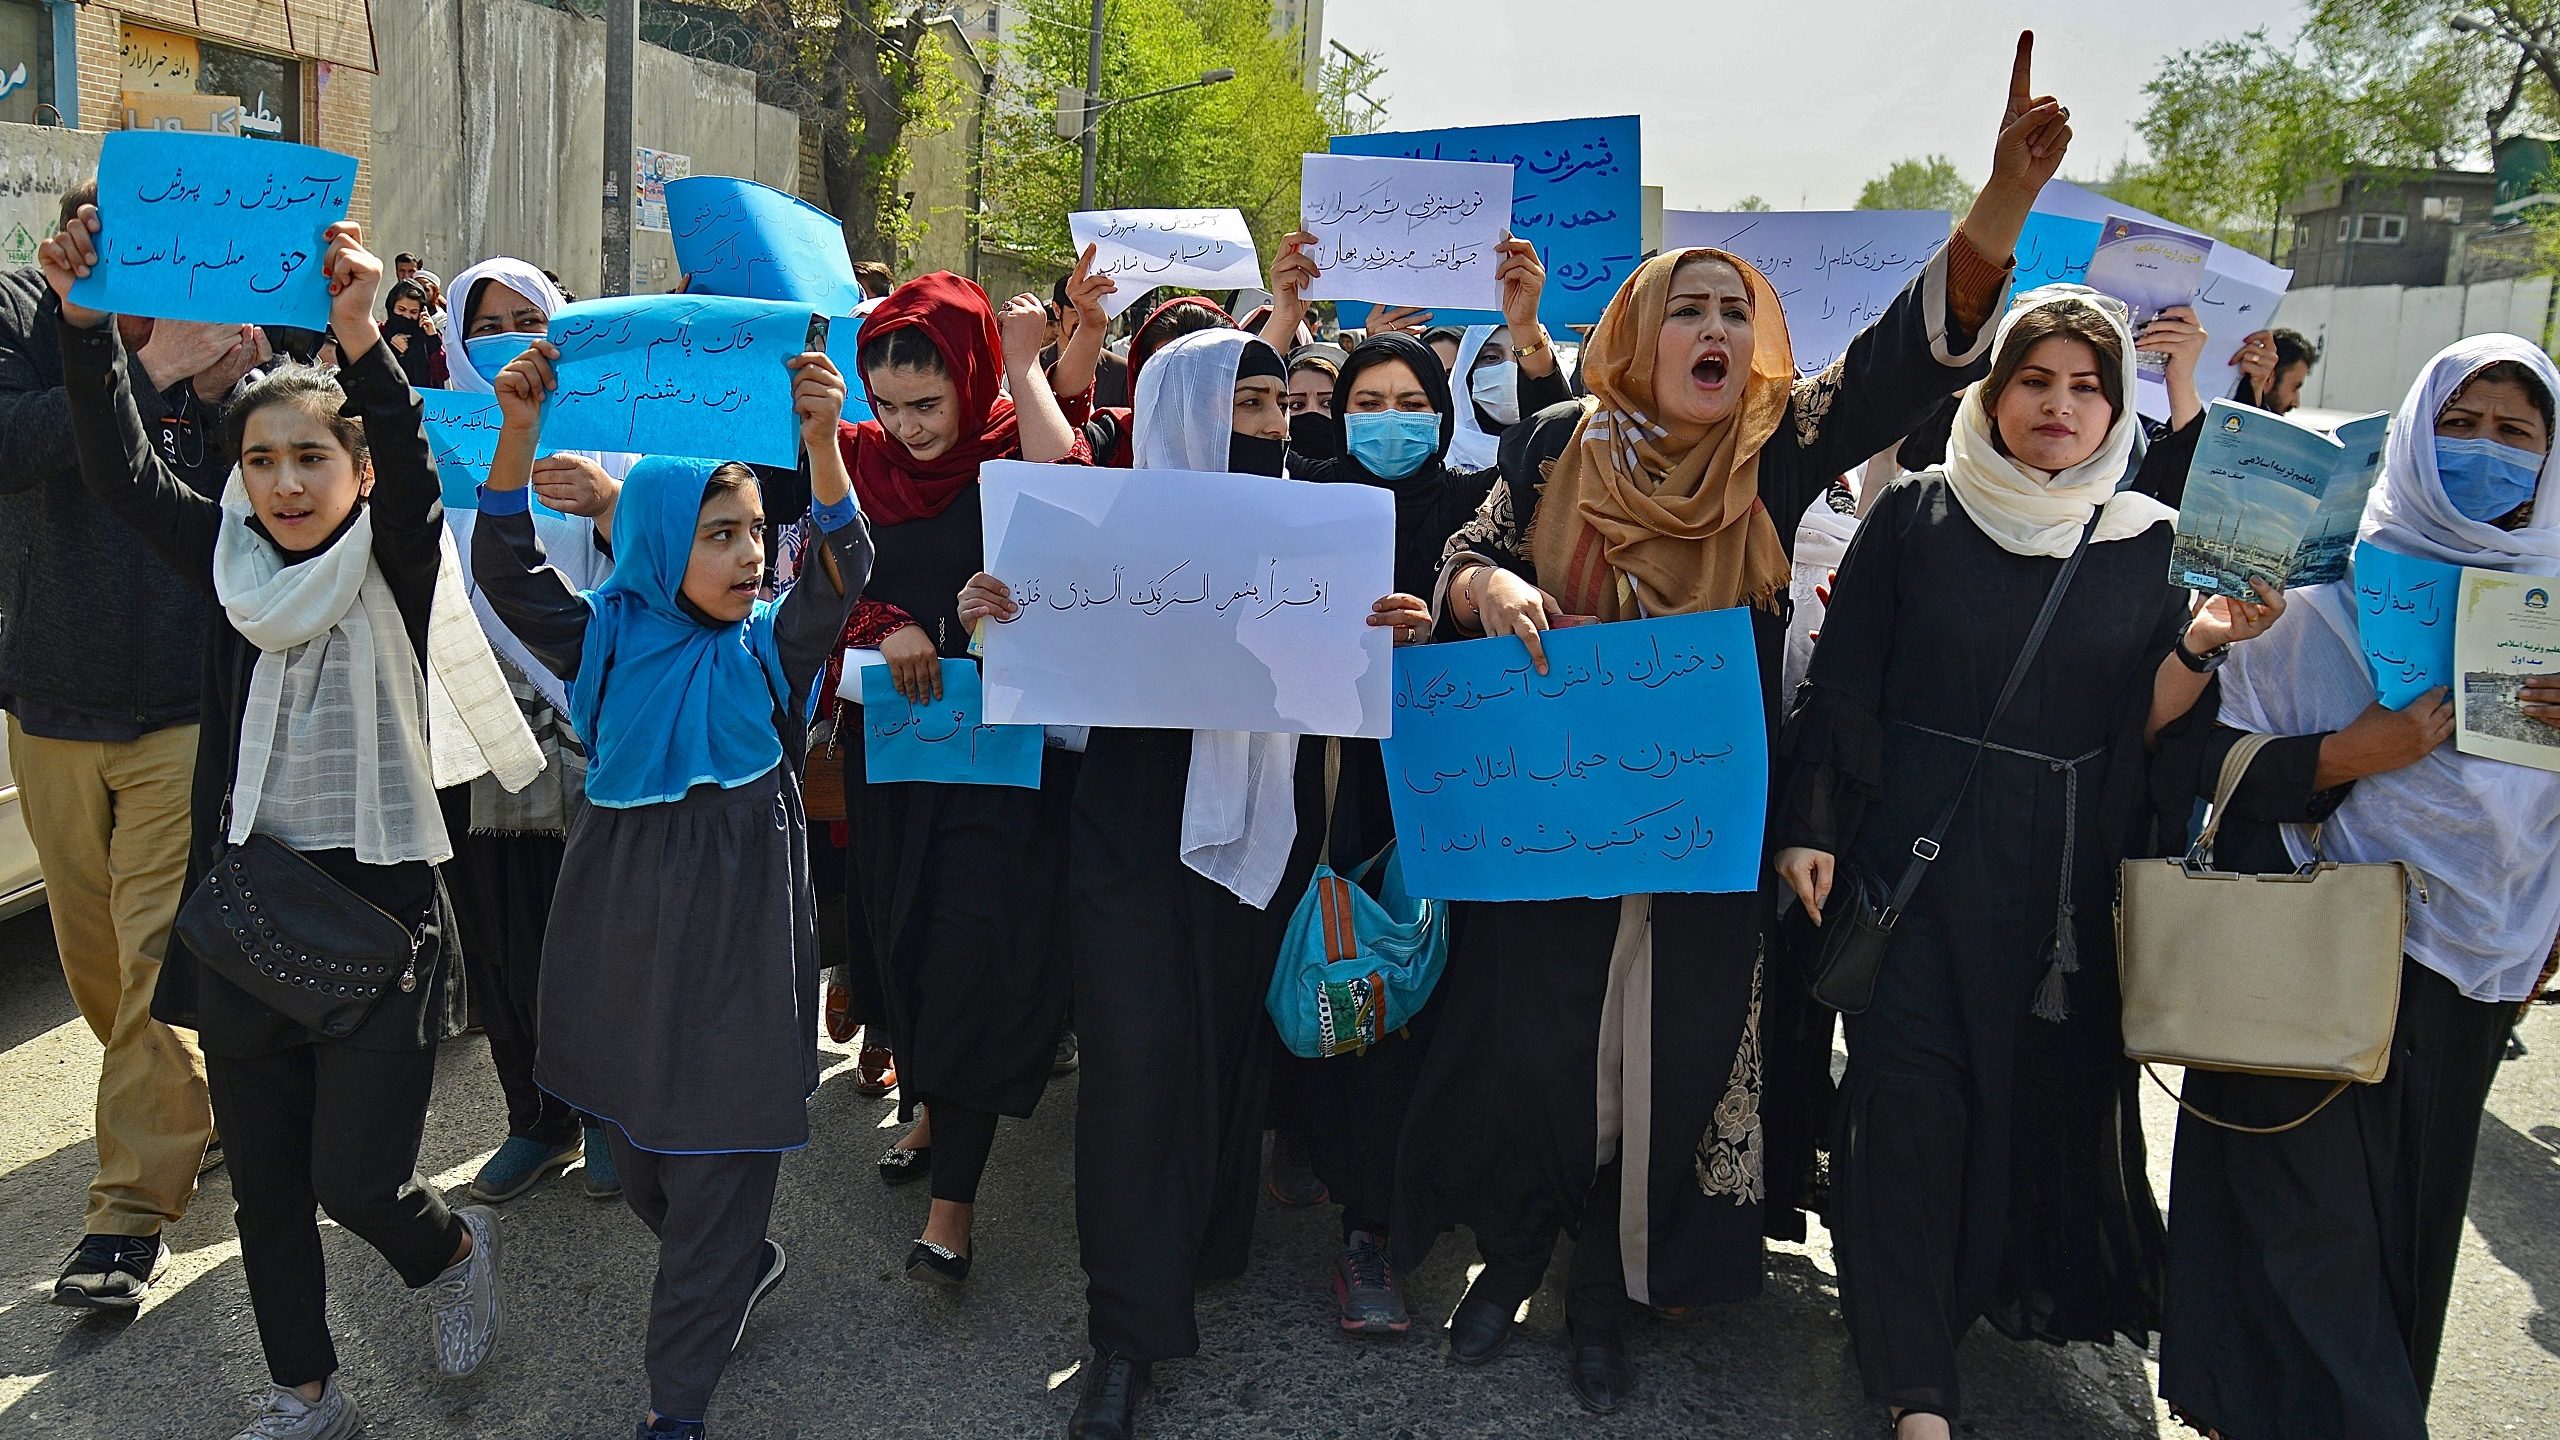 The US Drops Economic Talks After Taliban Bans Girls From High Schools